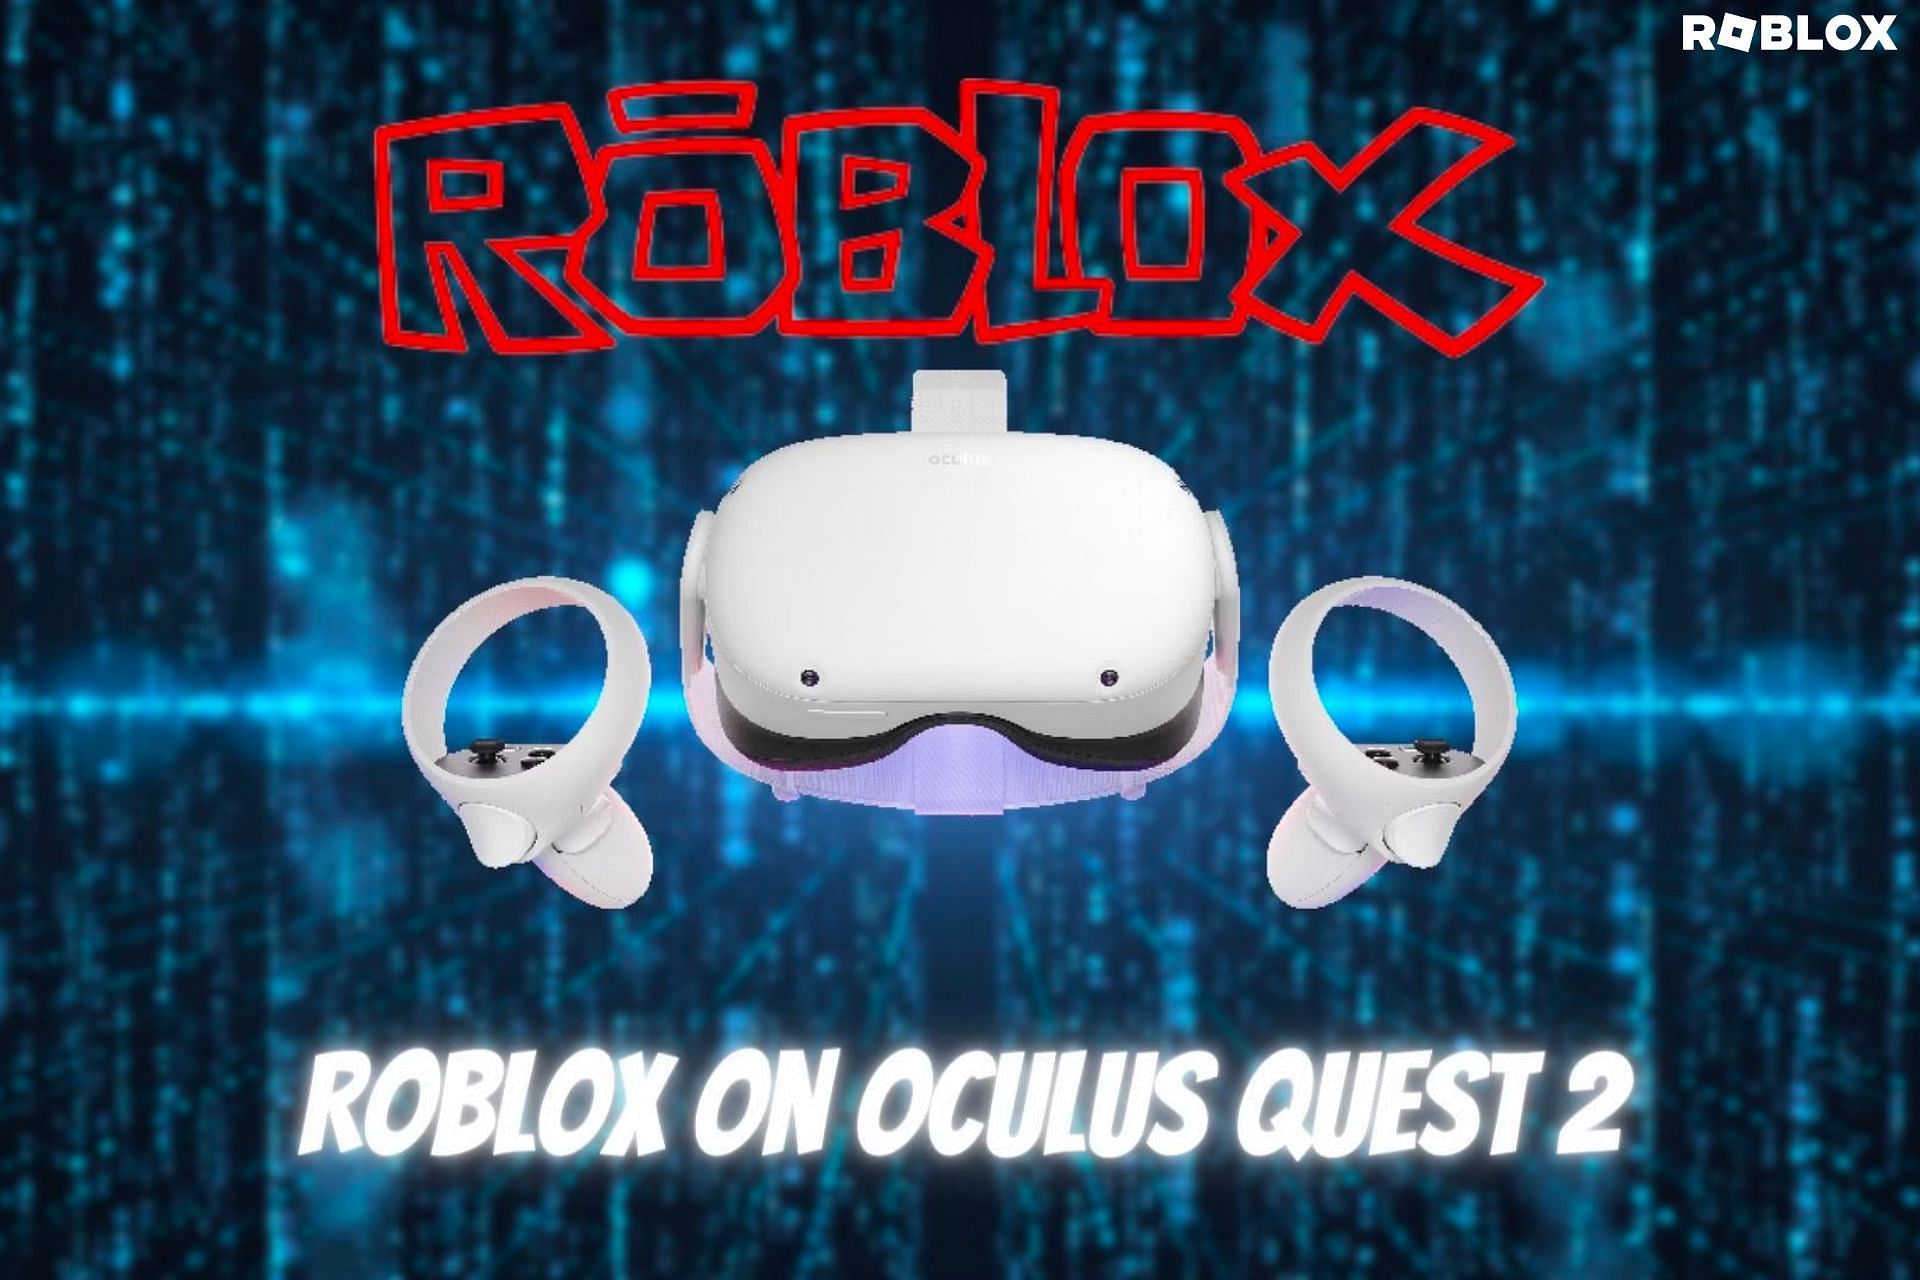 When Is Roblox Coming To VR? Answered